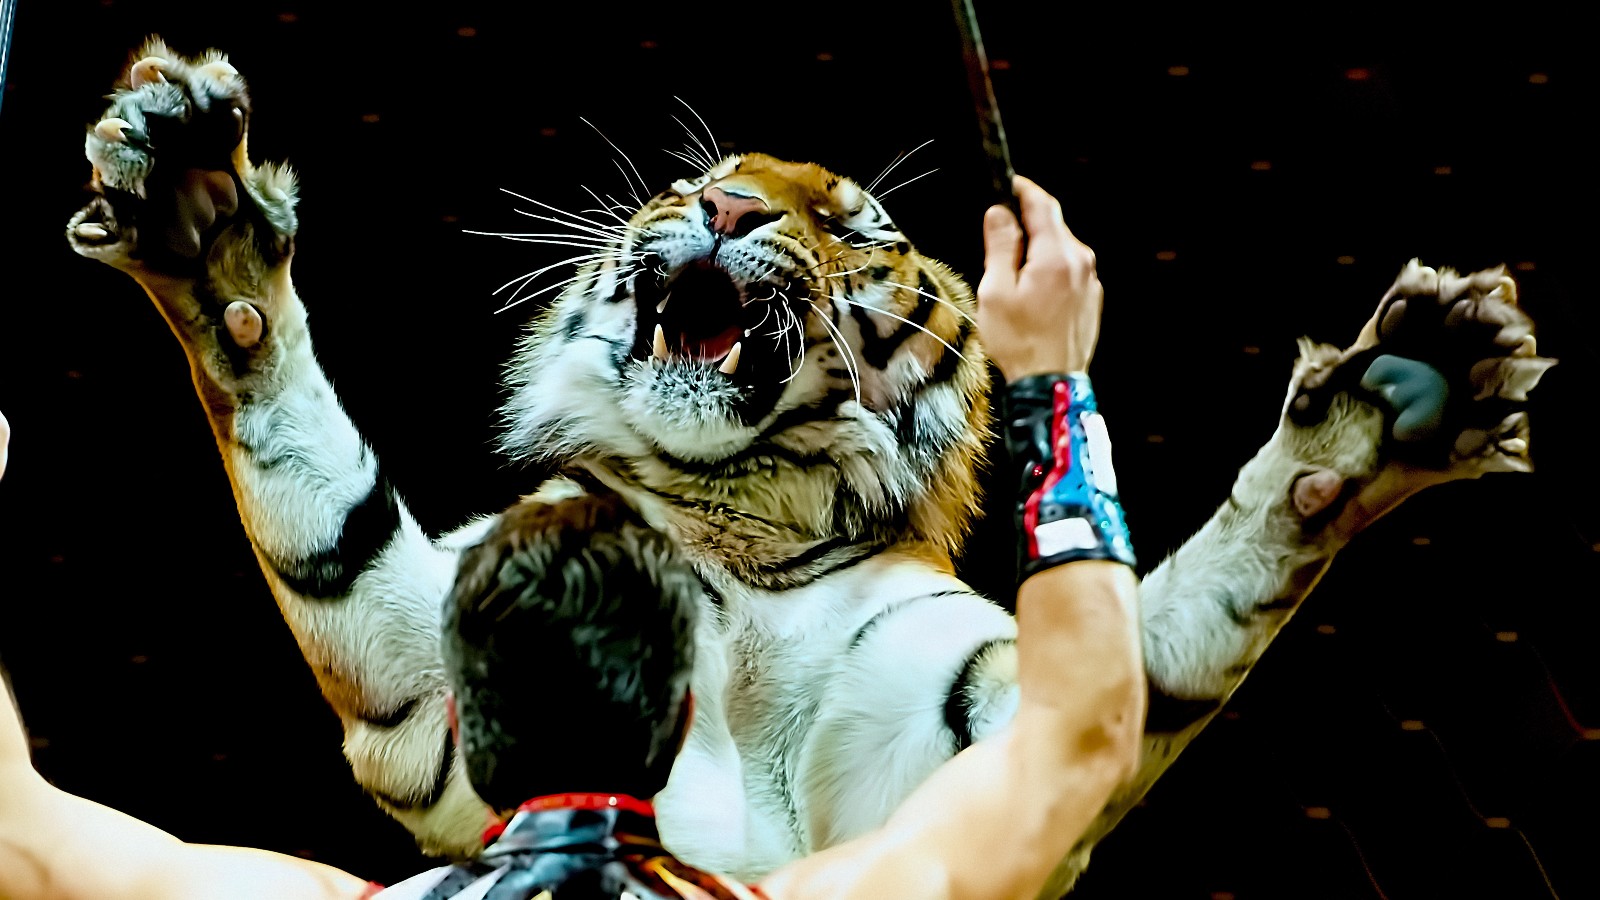 A tiger taking part in a circus performance